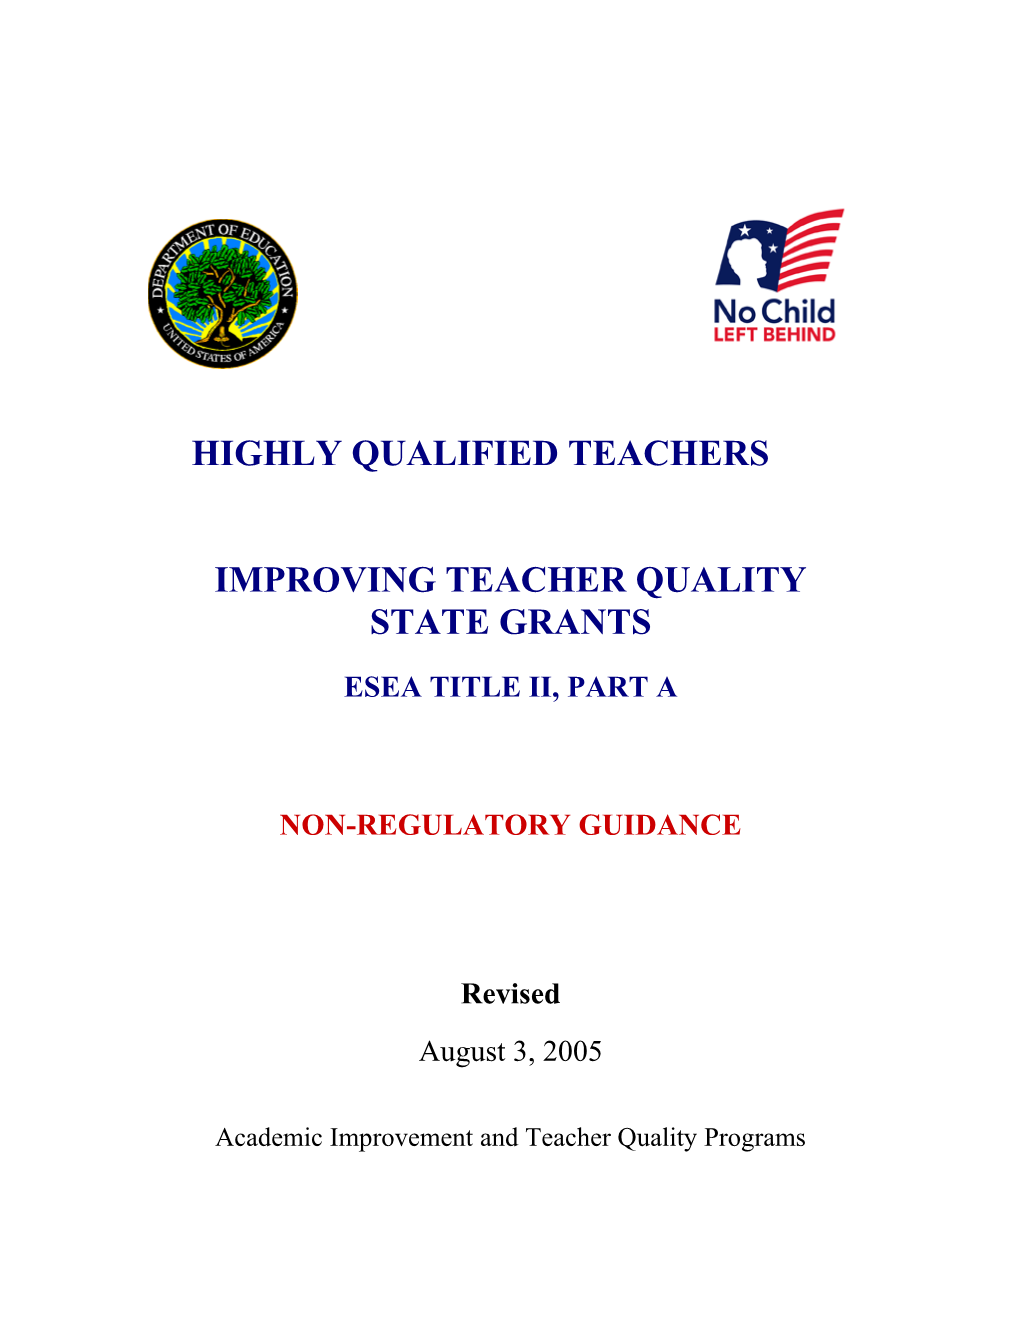 Title II, Part A Non-Regulatory Guidance Improving Teacher Quality State Grants, Revised August 3, 2005 (MS Word)